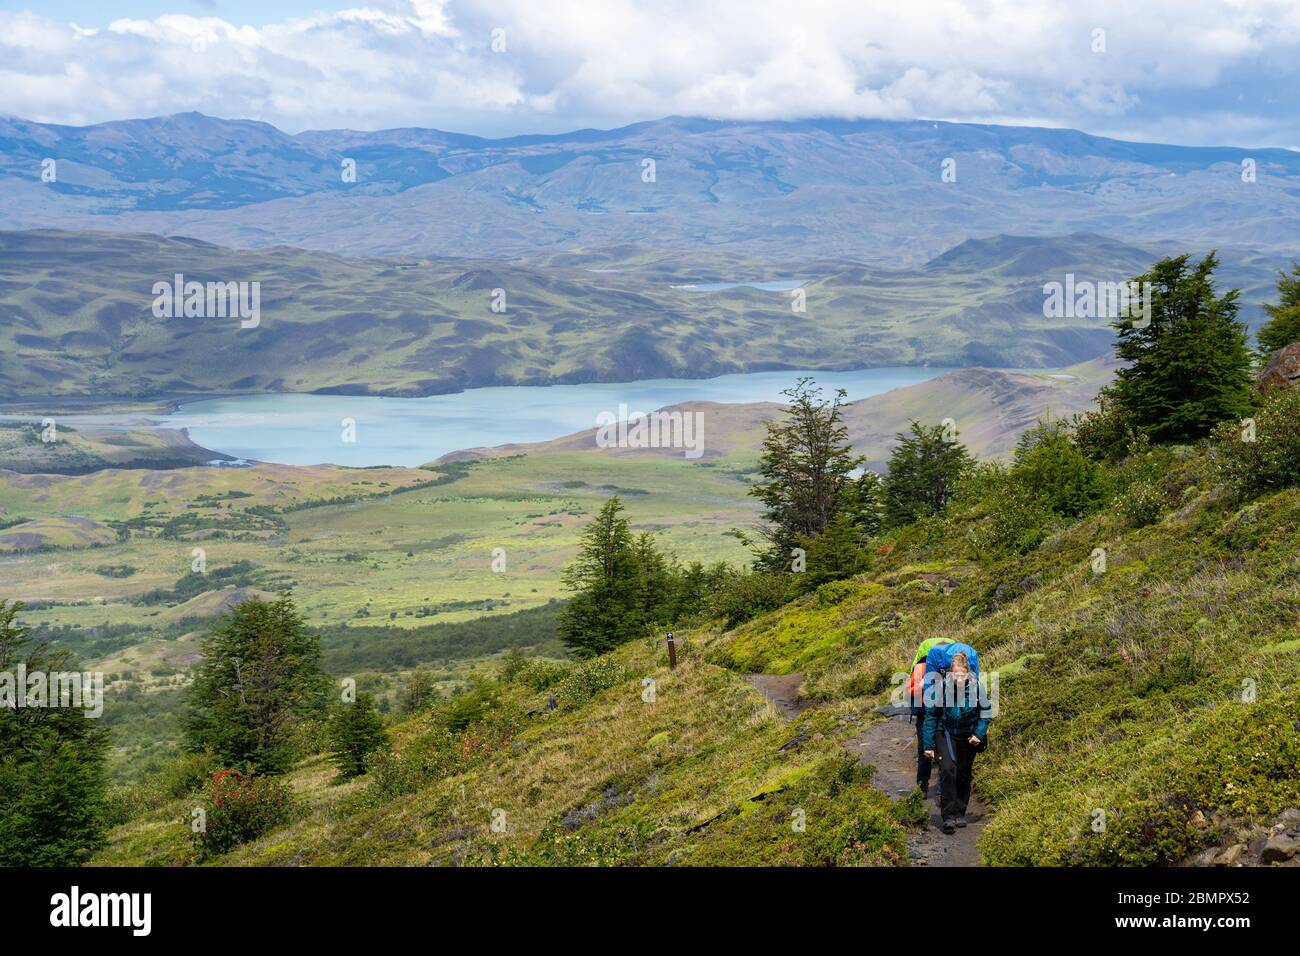 Hikers walking the famous W Trek in Torres del Paine National Park in Patagonia, Chile, South America. Stock Photo